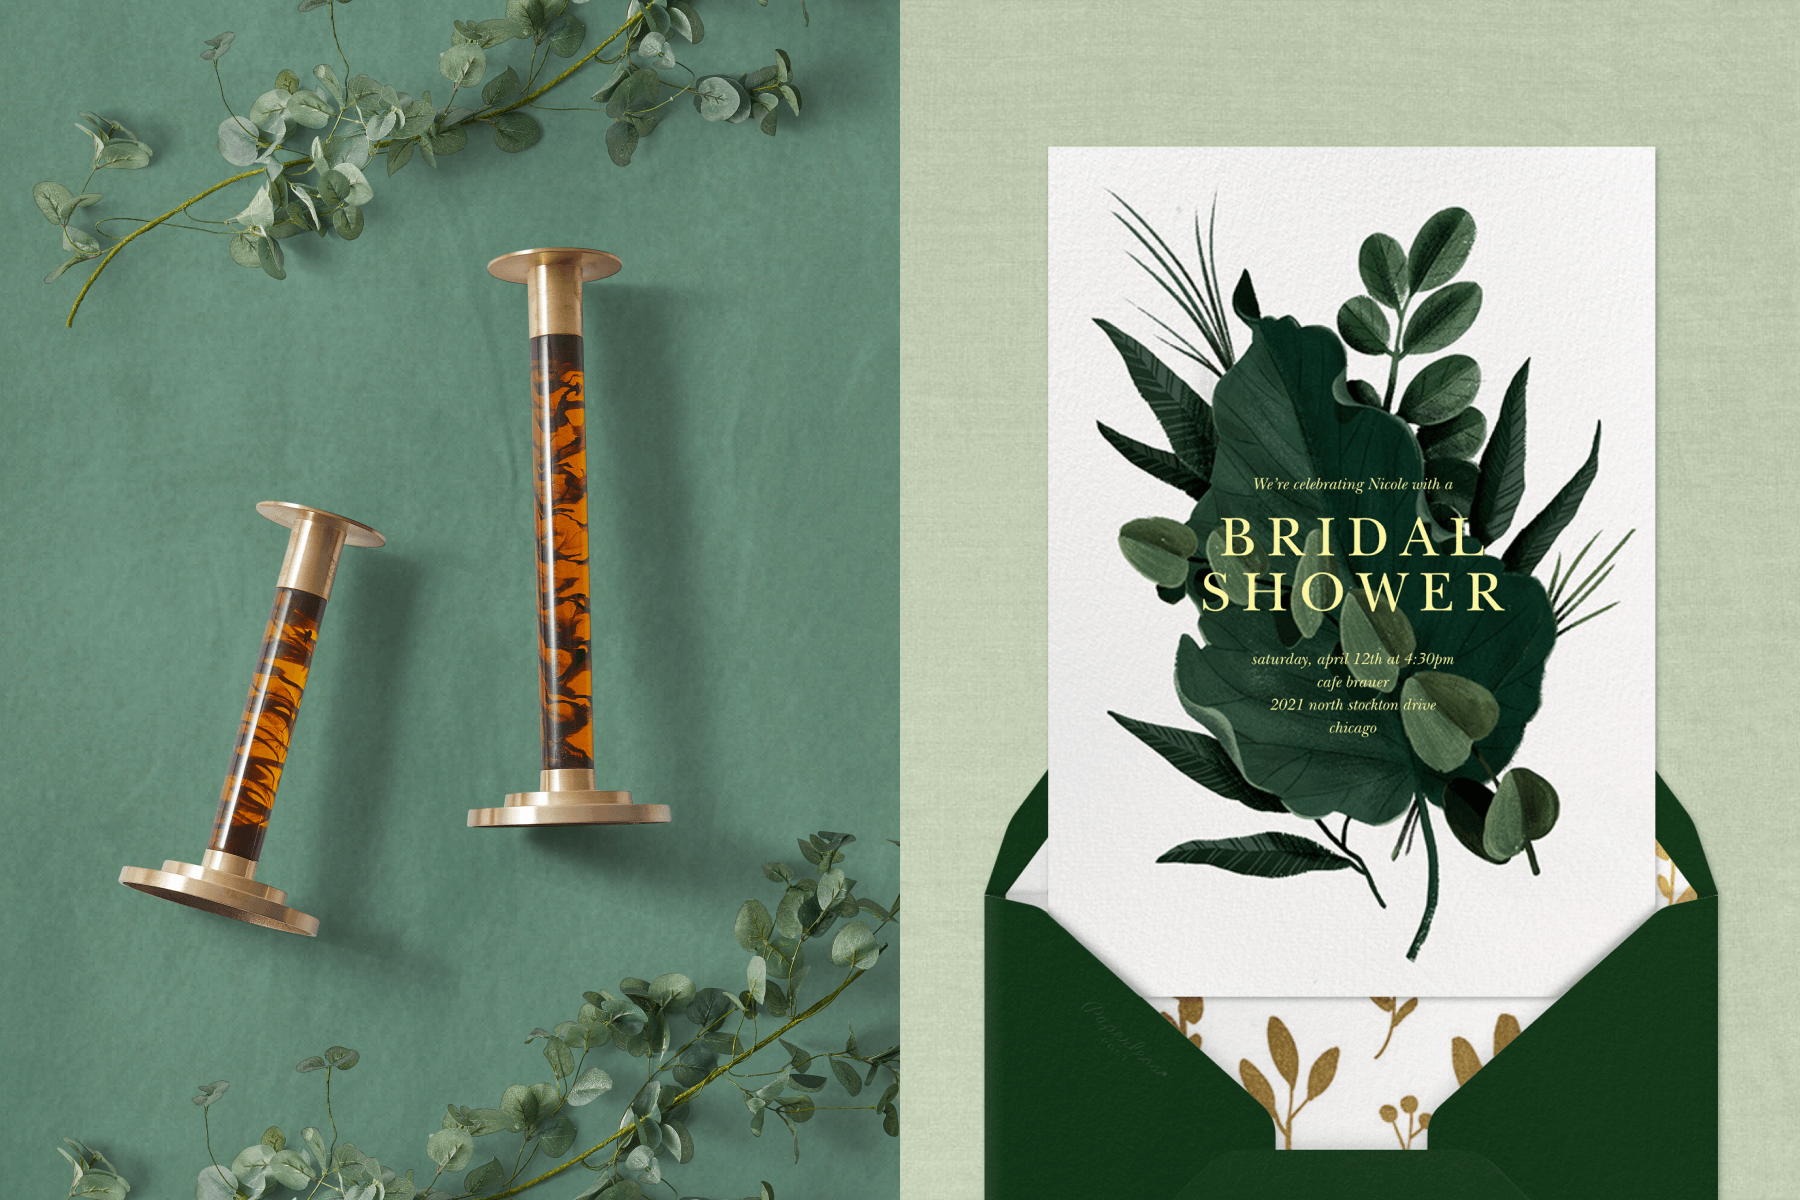 Two tortoiseshell candlesticks on a green background. Right: A bridal shower invitation with a pile of deep green leaves.